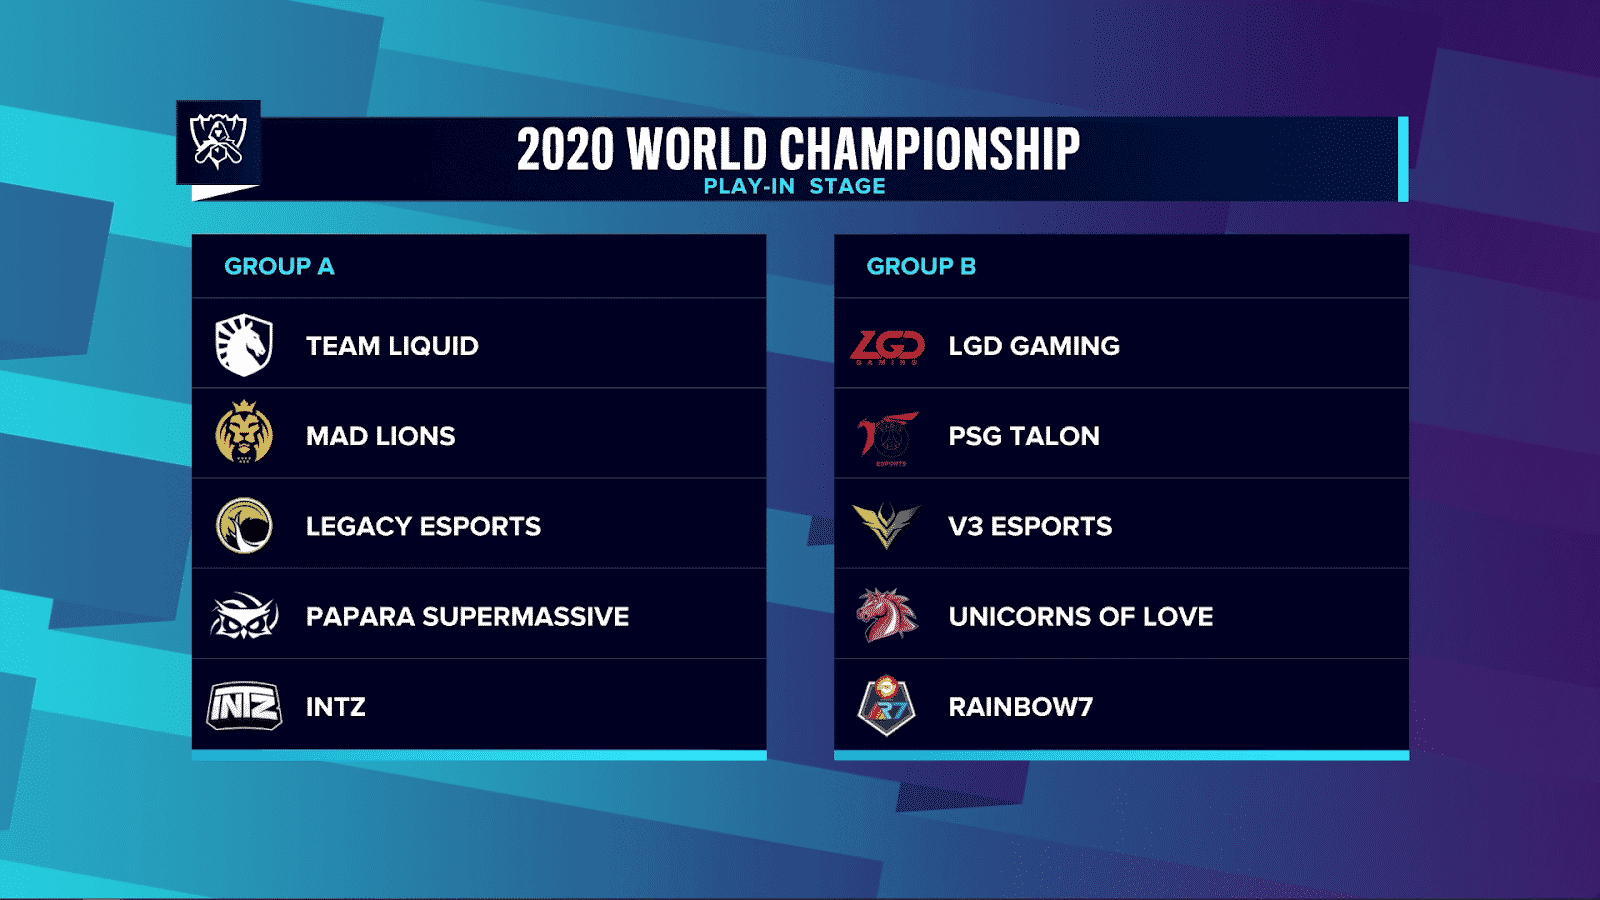 The draw for the play-in stage of the 2020 LoL World Championship